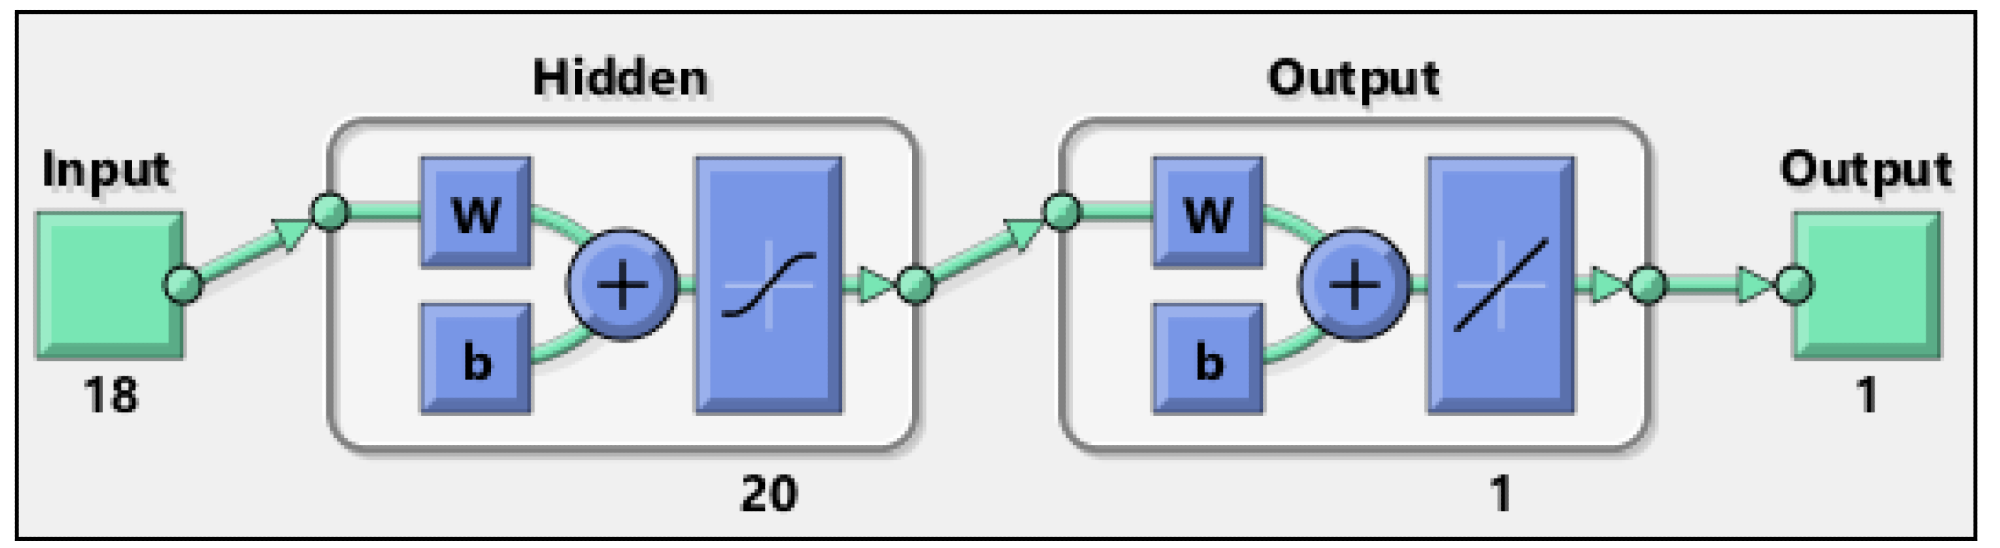 Artificial neural network architecture from MATLAB software (R2022a).